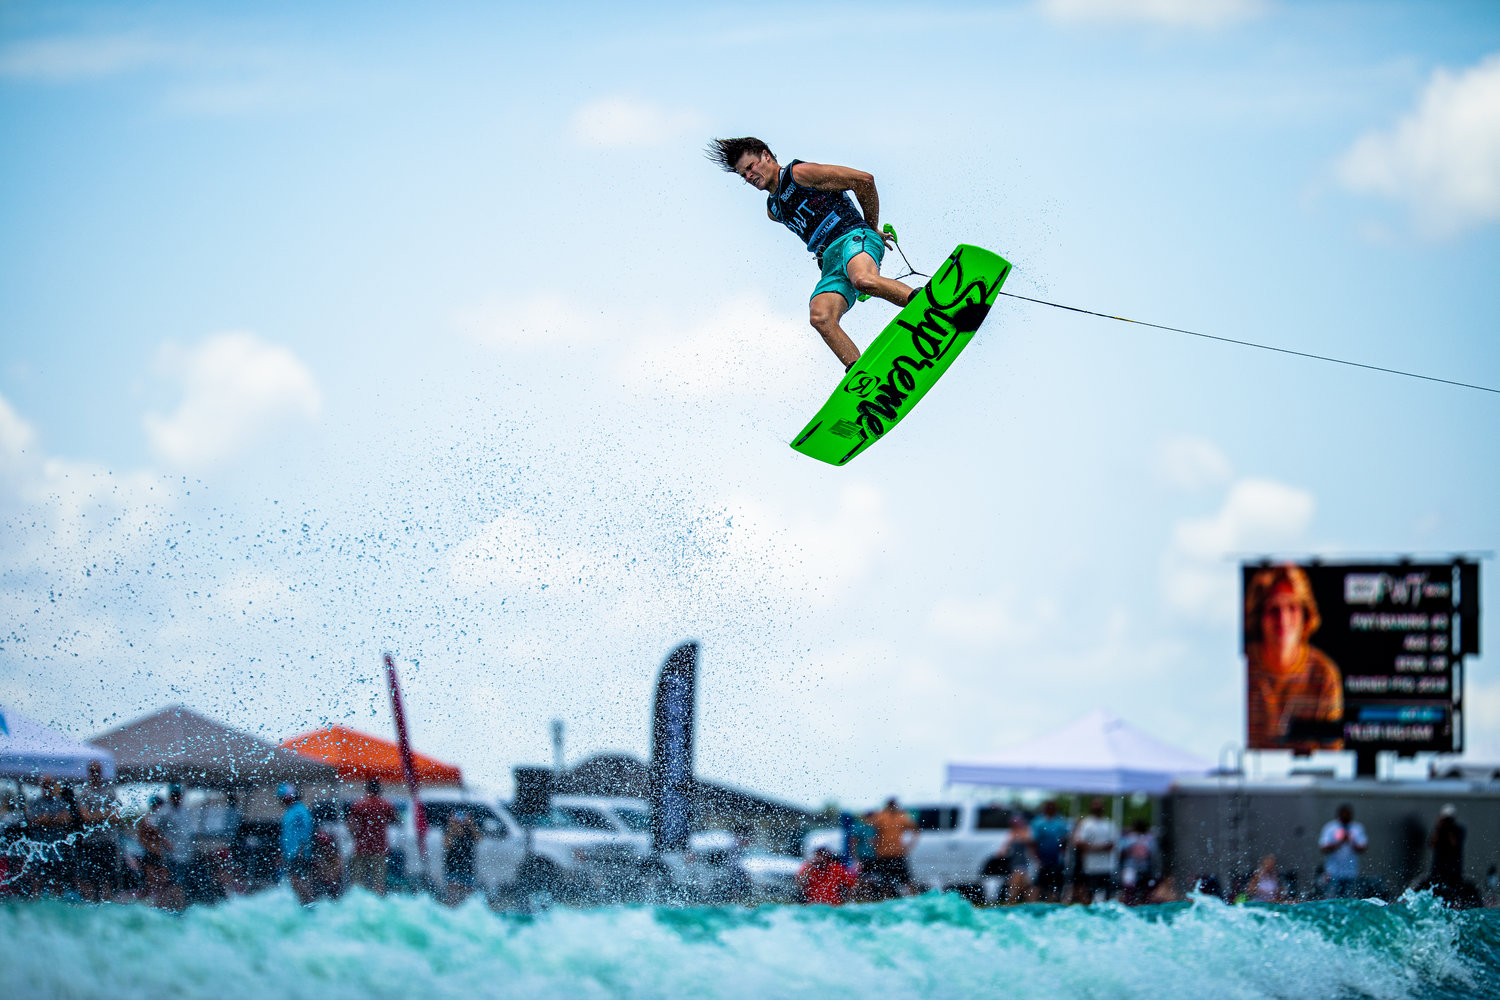 The 2021 Pro Wakeboard, Pro Wakesurf and Junior Pro Wakeboard tours were held in Katy on June 11-12. In pro men wakeboarding, Sam Brown ran away with the finals win with a score of 90. In pro men wakesurfing, Sean Silveira took first with a score of 91.66.